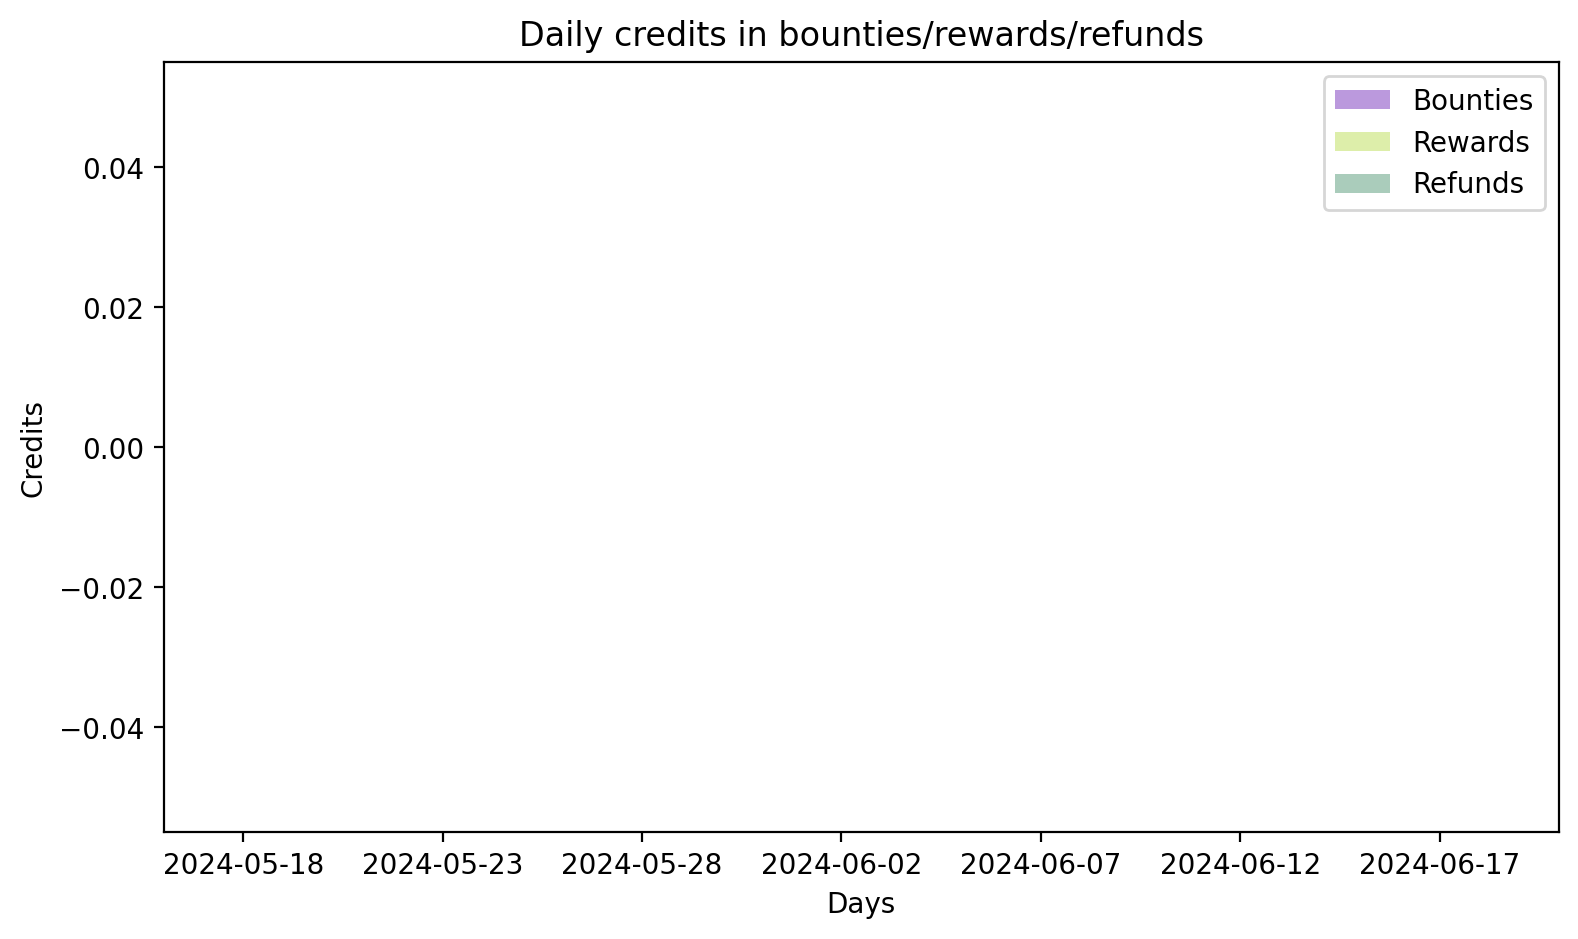 Daily credits cleared in bounties/rewards/refunds